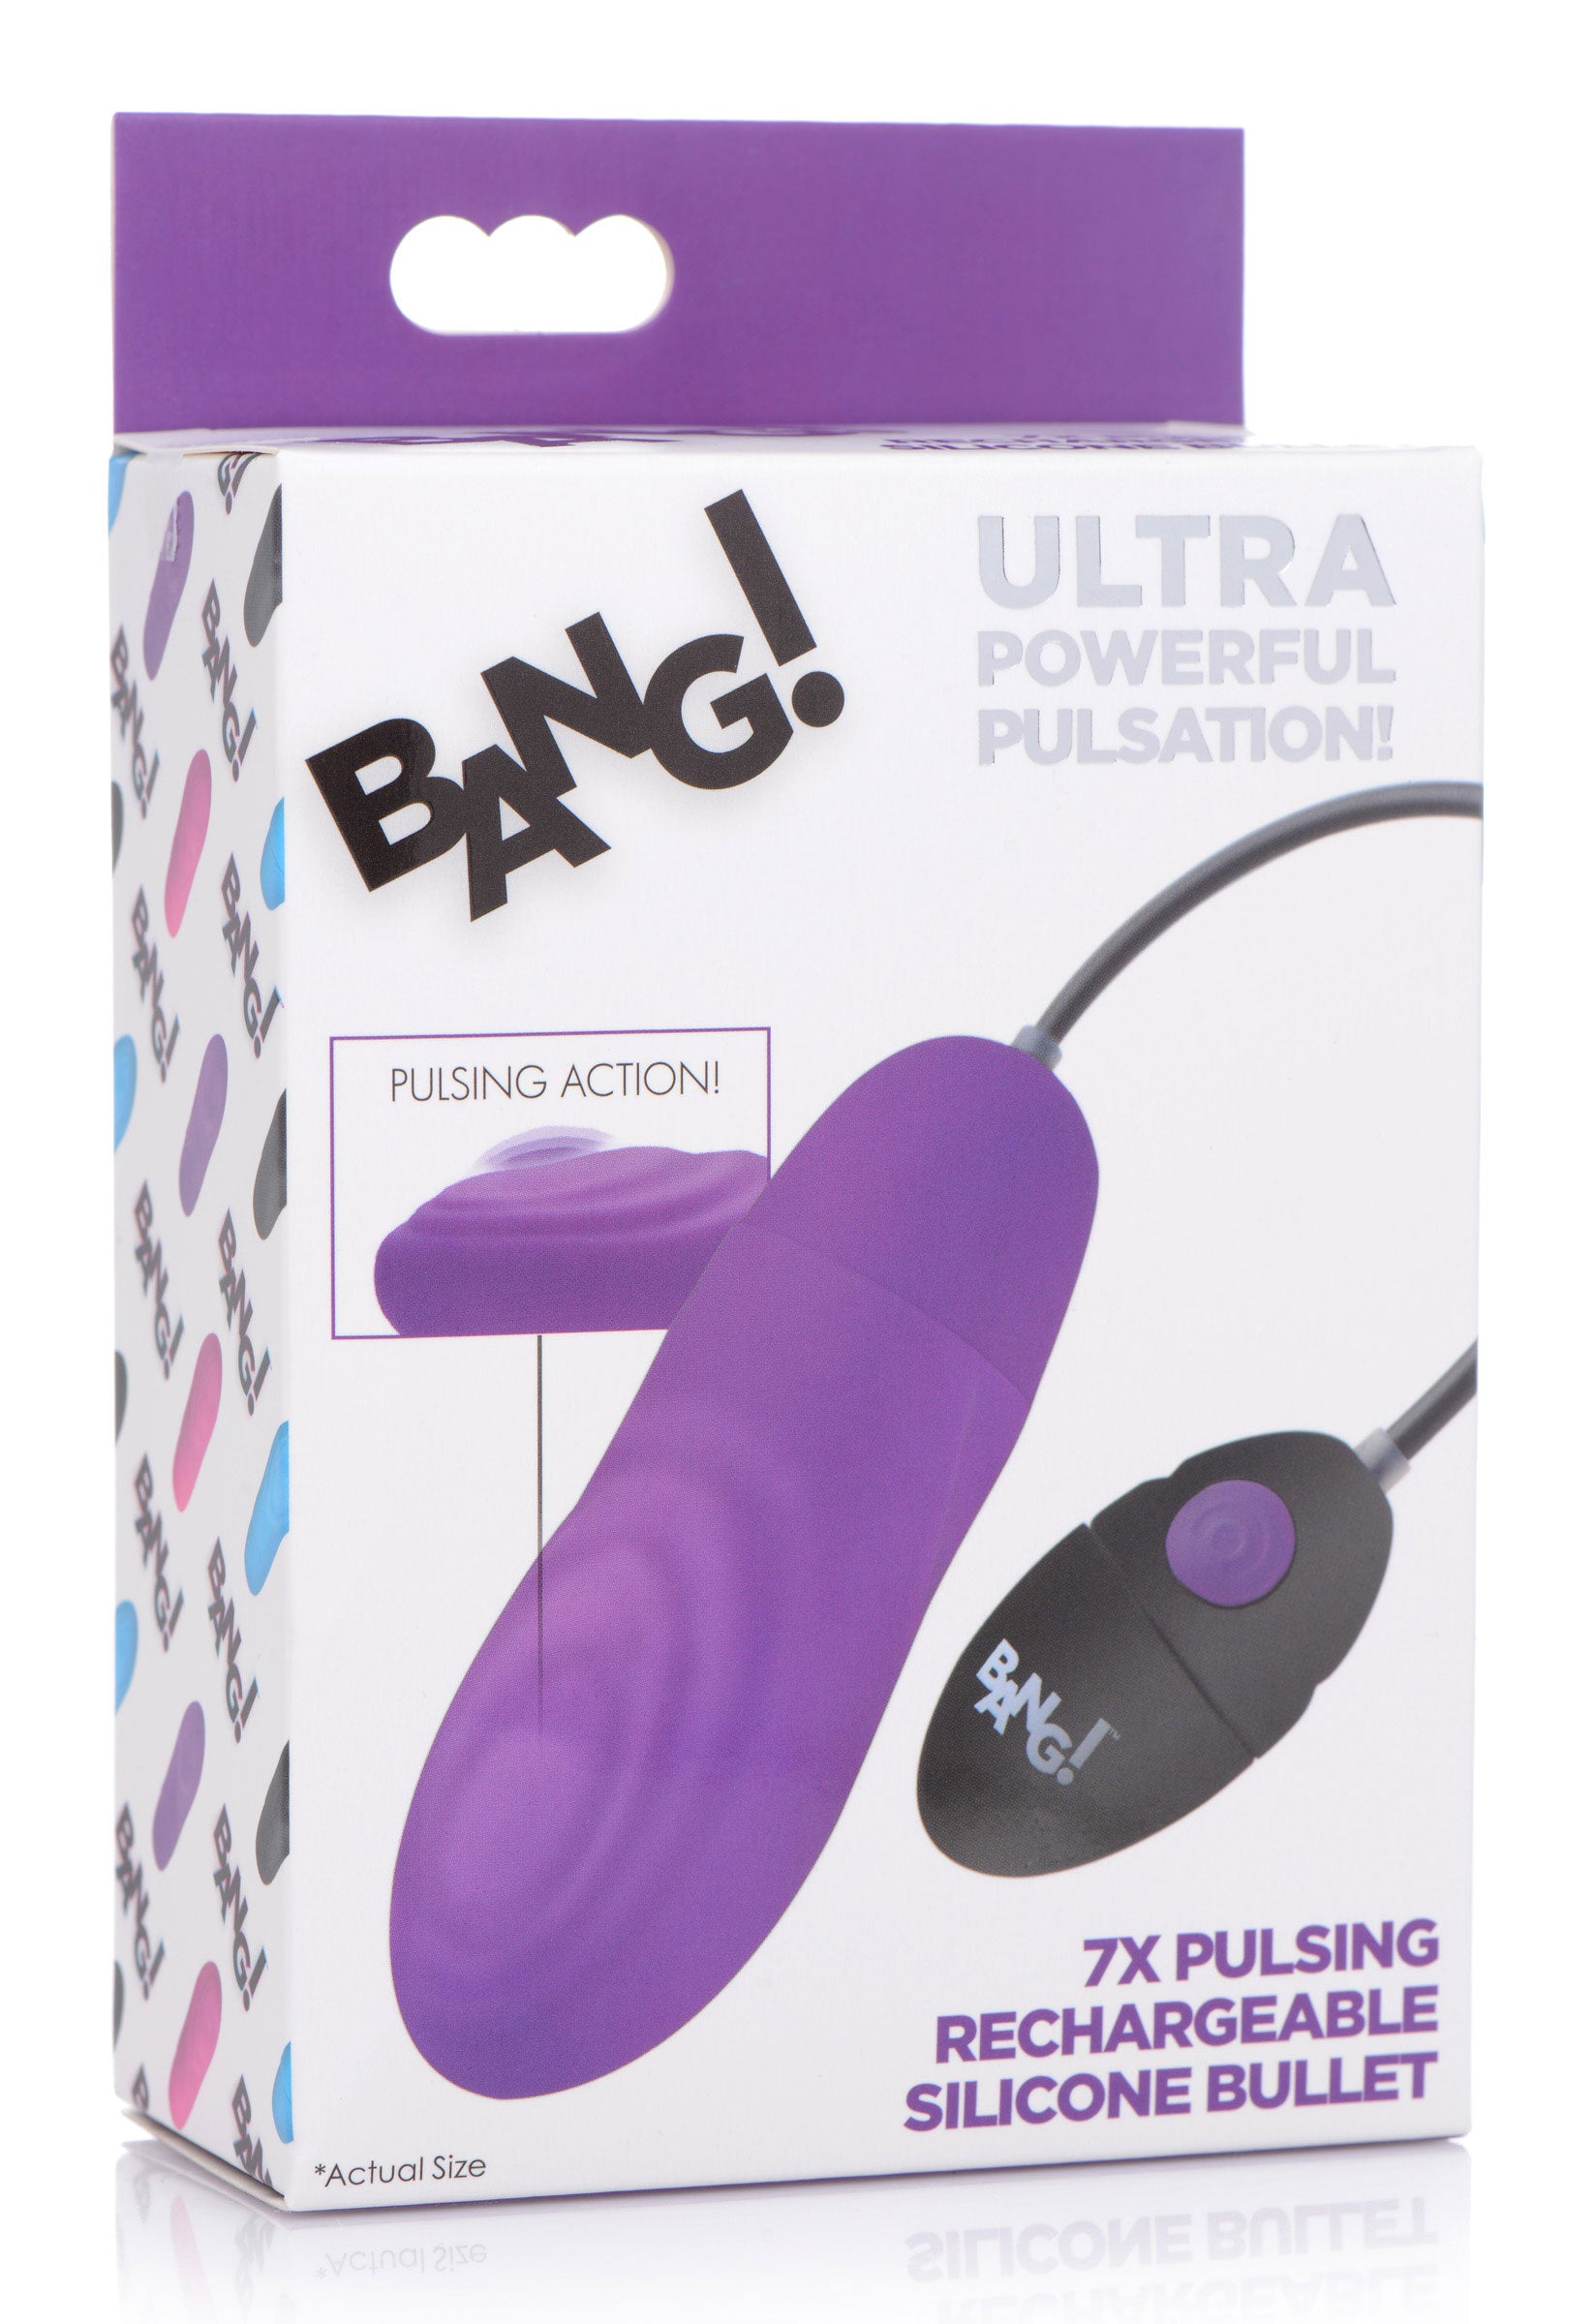 Intense 7x Pulsing Rechargeable Silicone Bullet Purple